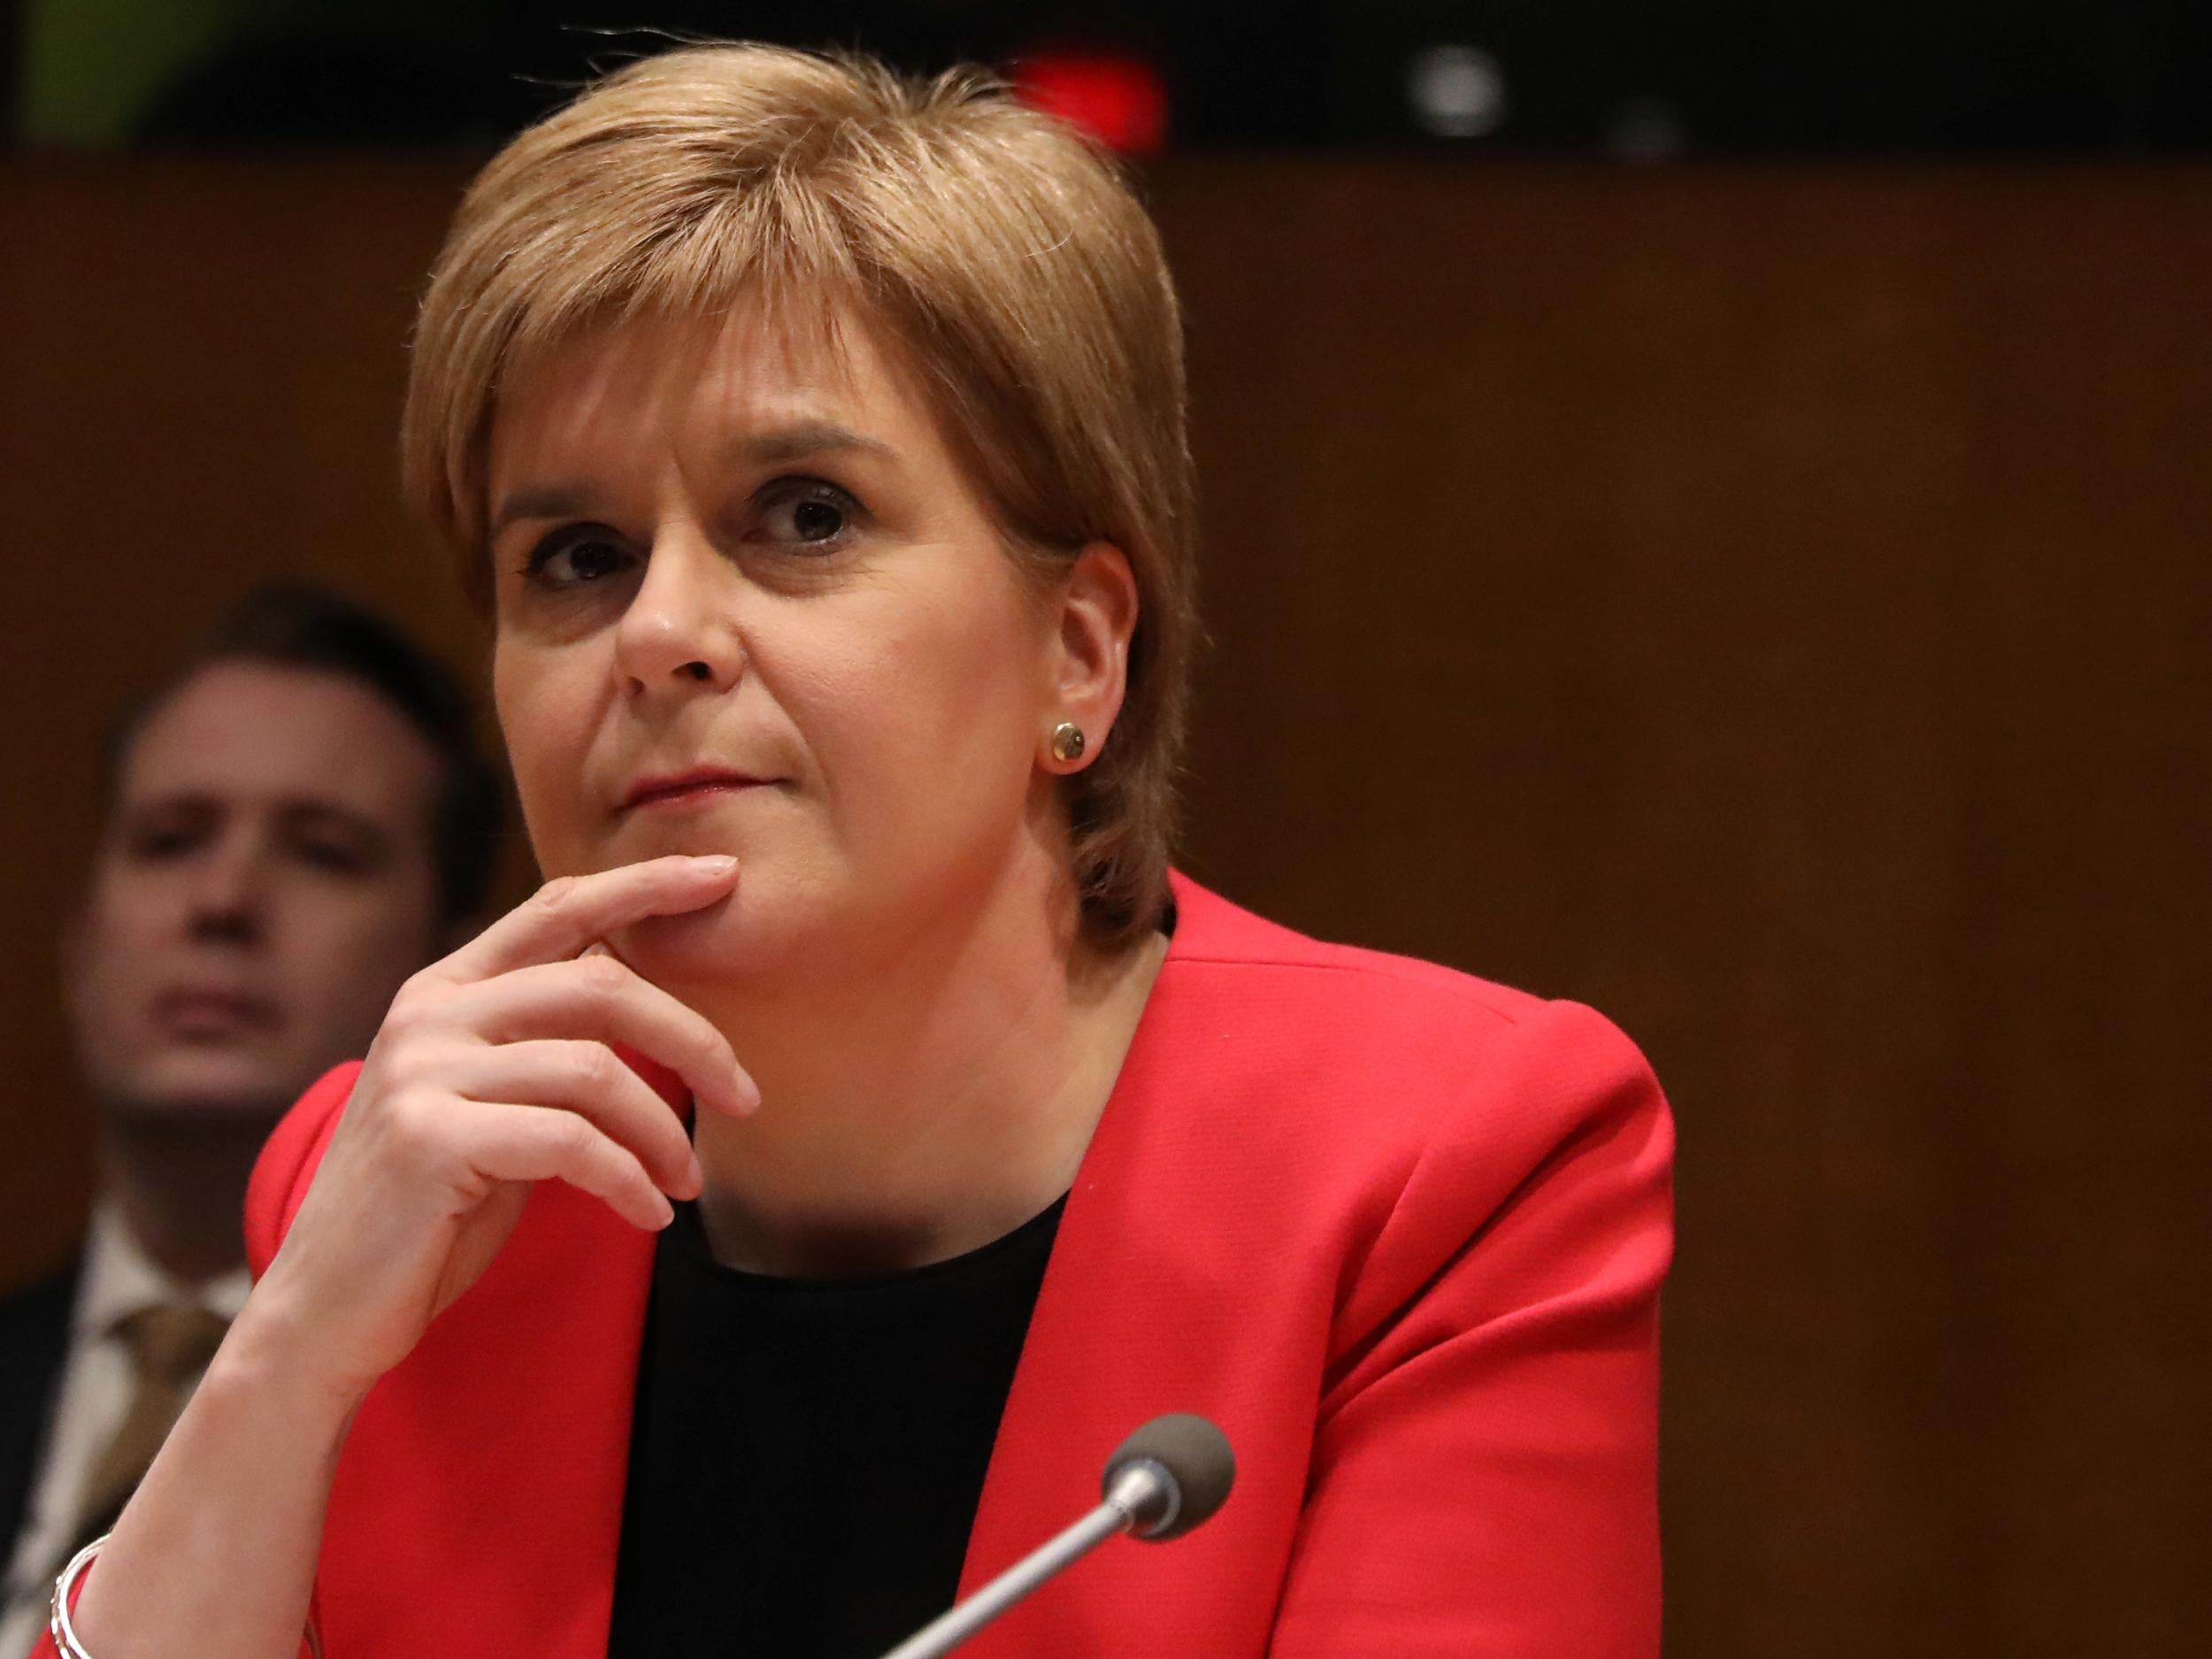 Scotland's First Minister Nicola Sturgeon waits to speak at a conference at the United Nations Headquarters in New York City